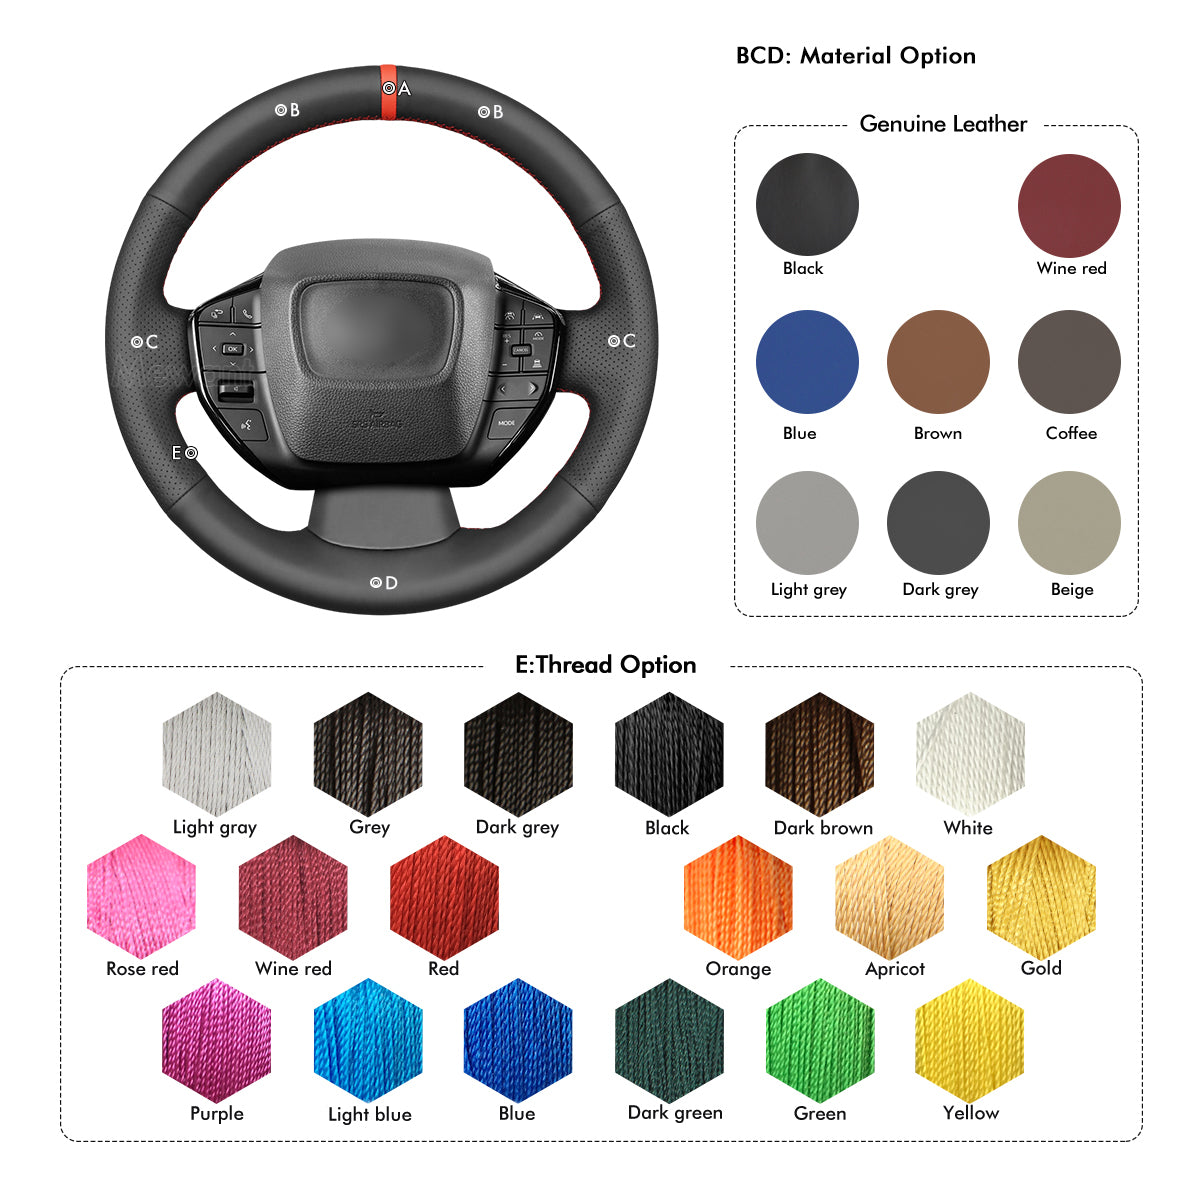 MEWANT Leather Car Steering Wheel Cover for Toyota Prius / BZ4X